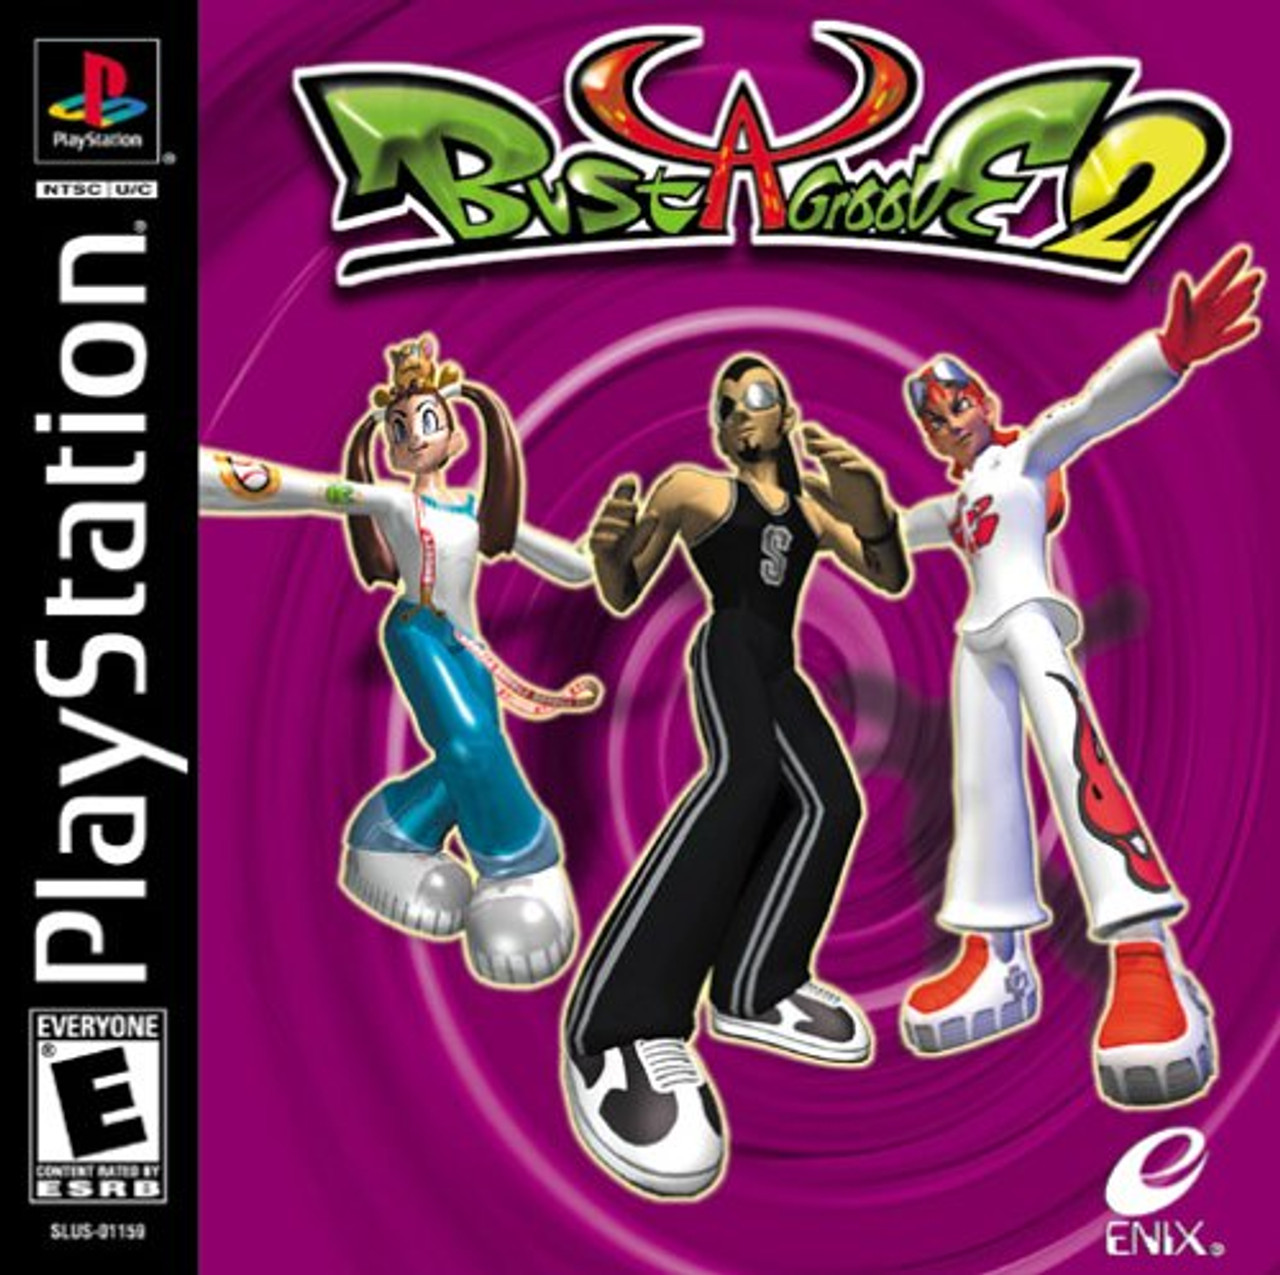 bust a move 4 ps1 music